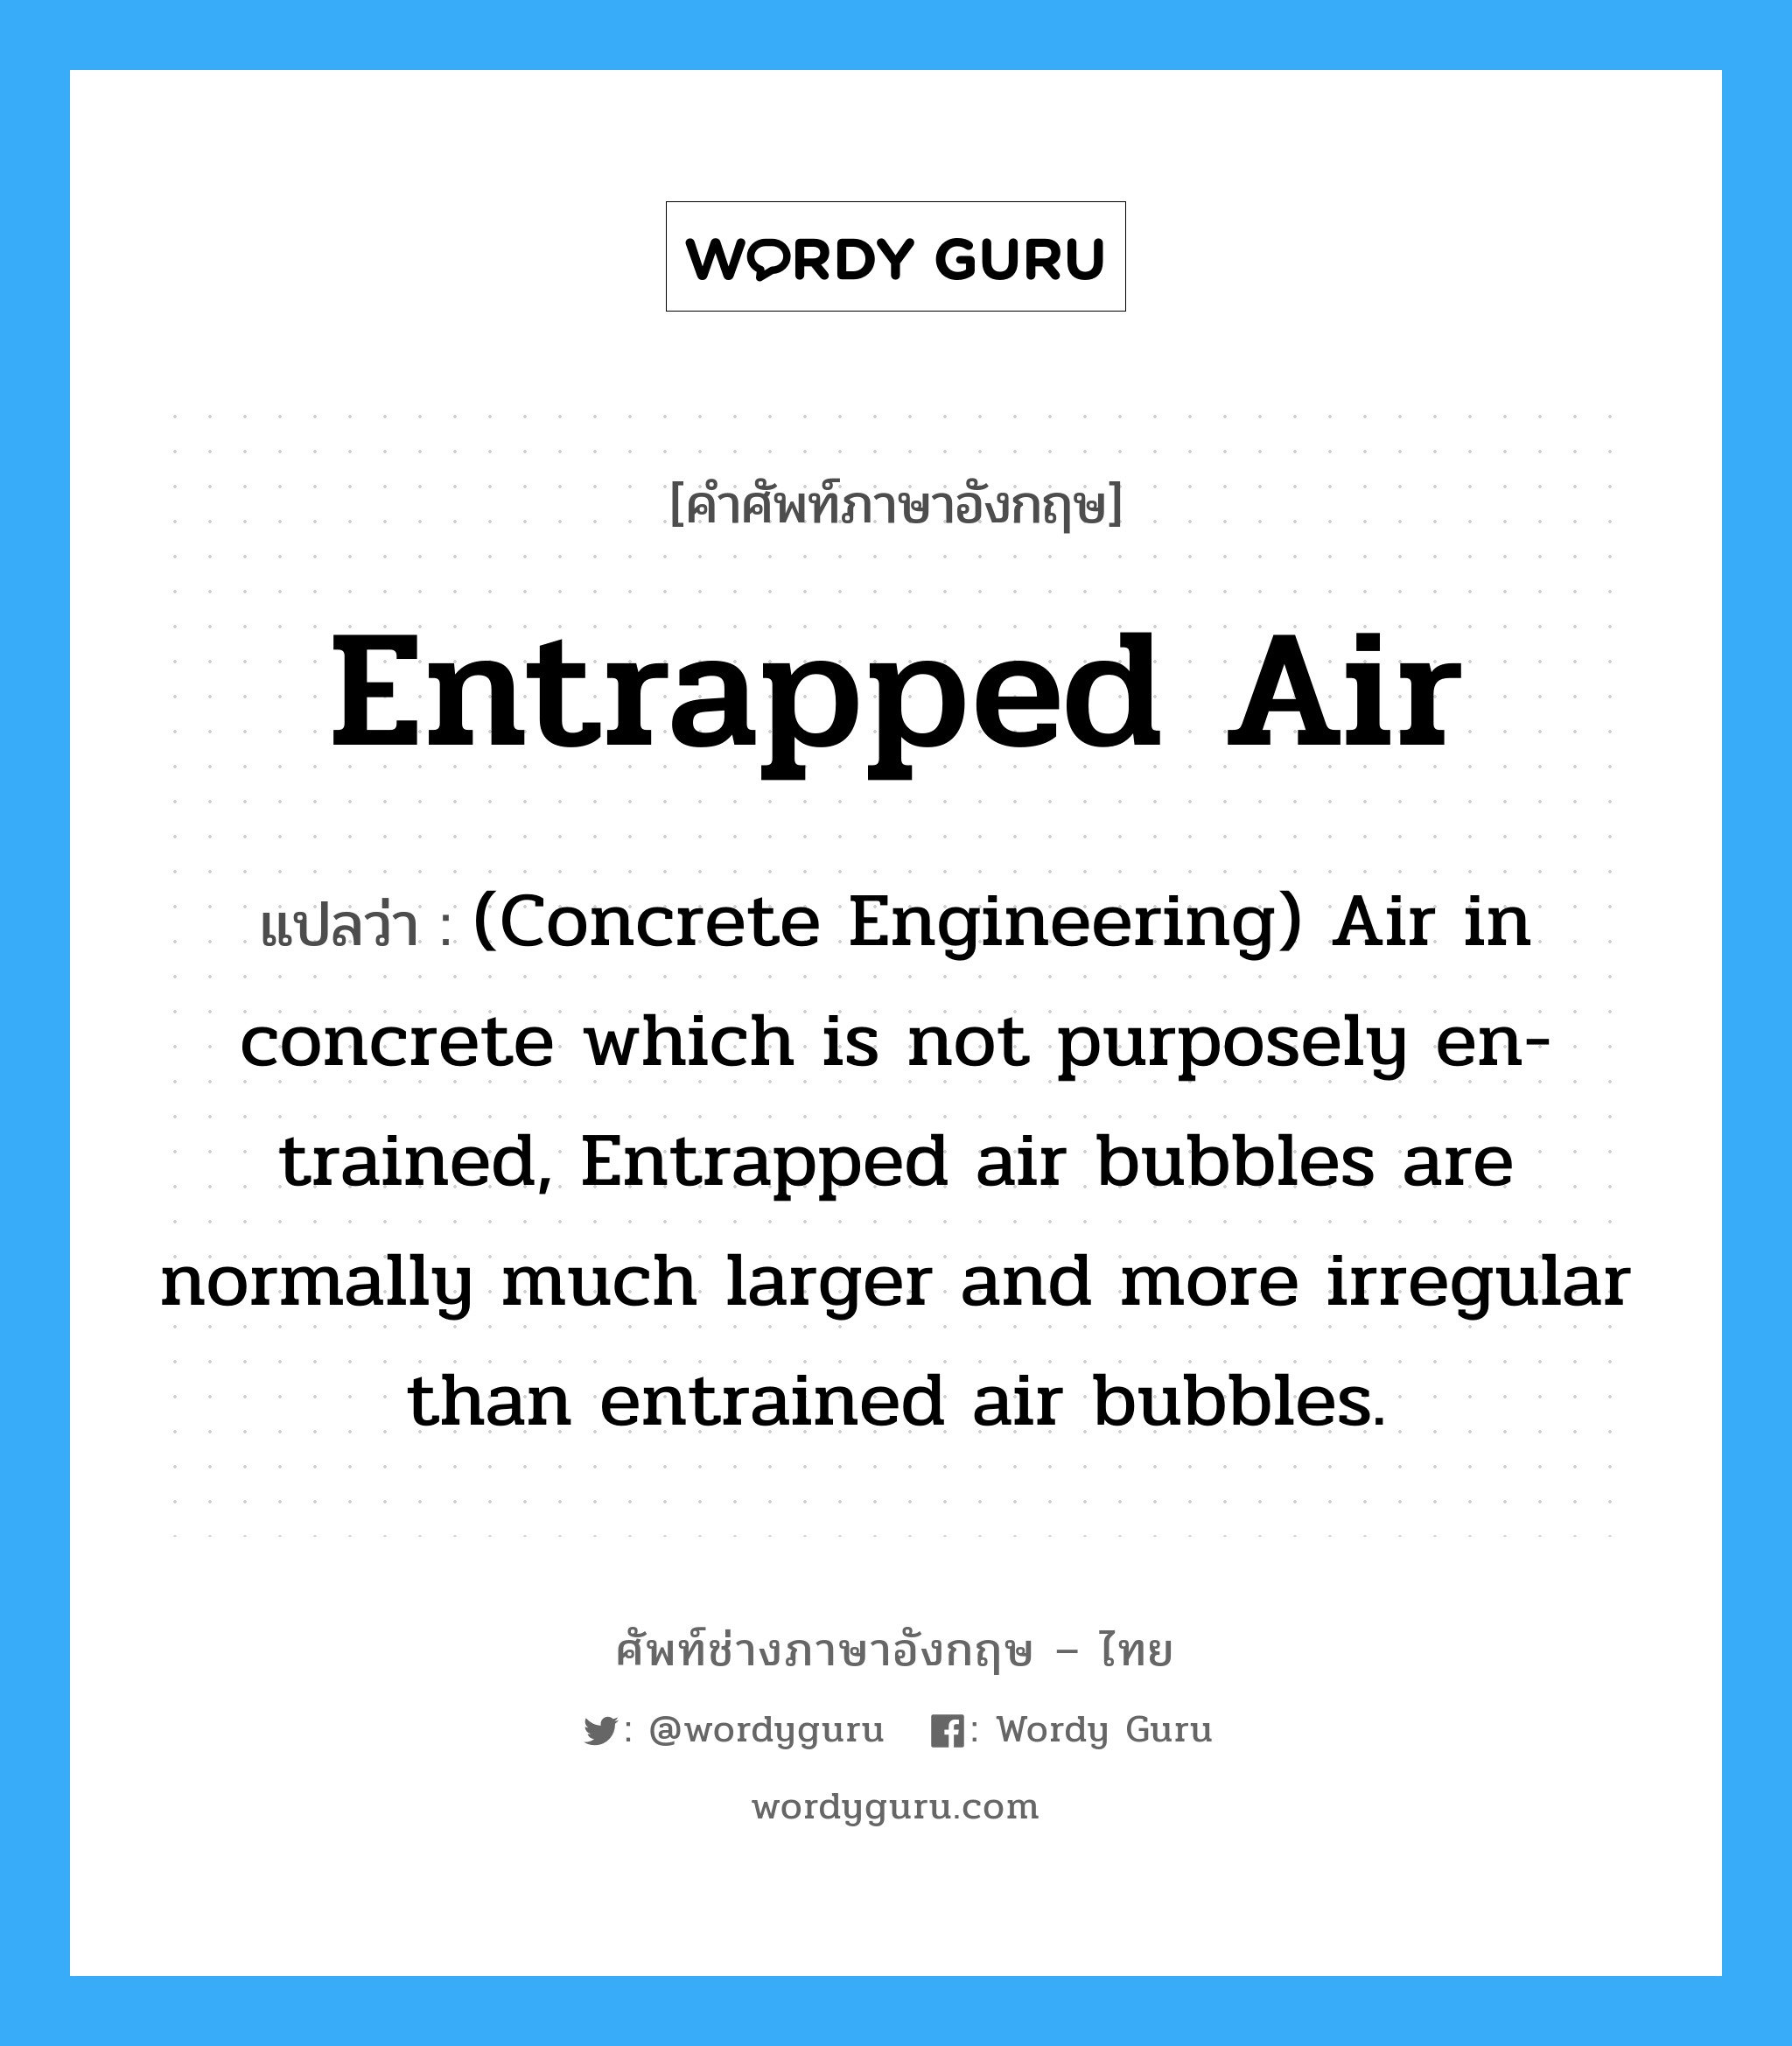 Entrapped Air แปลว่า?, คำศัพท์ช่างภาษาอังกฤษ - ไทย Entrapped Air คำศัพท์ภาษาอังกฤษ Entrapped Air แปลว่า (Concrete Engineering) Air in concrete which is not purposely en-trained, Entrapped air bubbles are normally much larger and more irregular than entrained air bubbles.